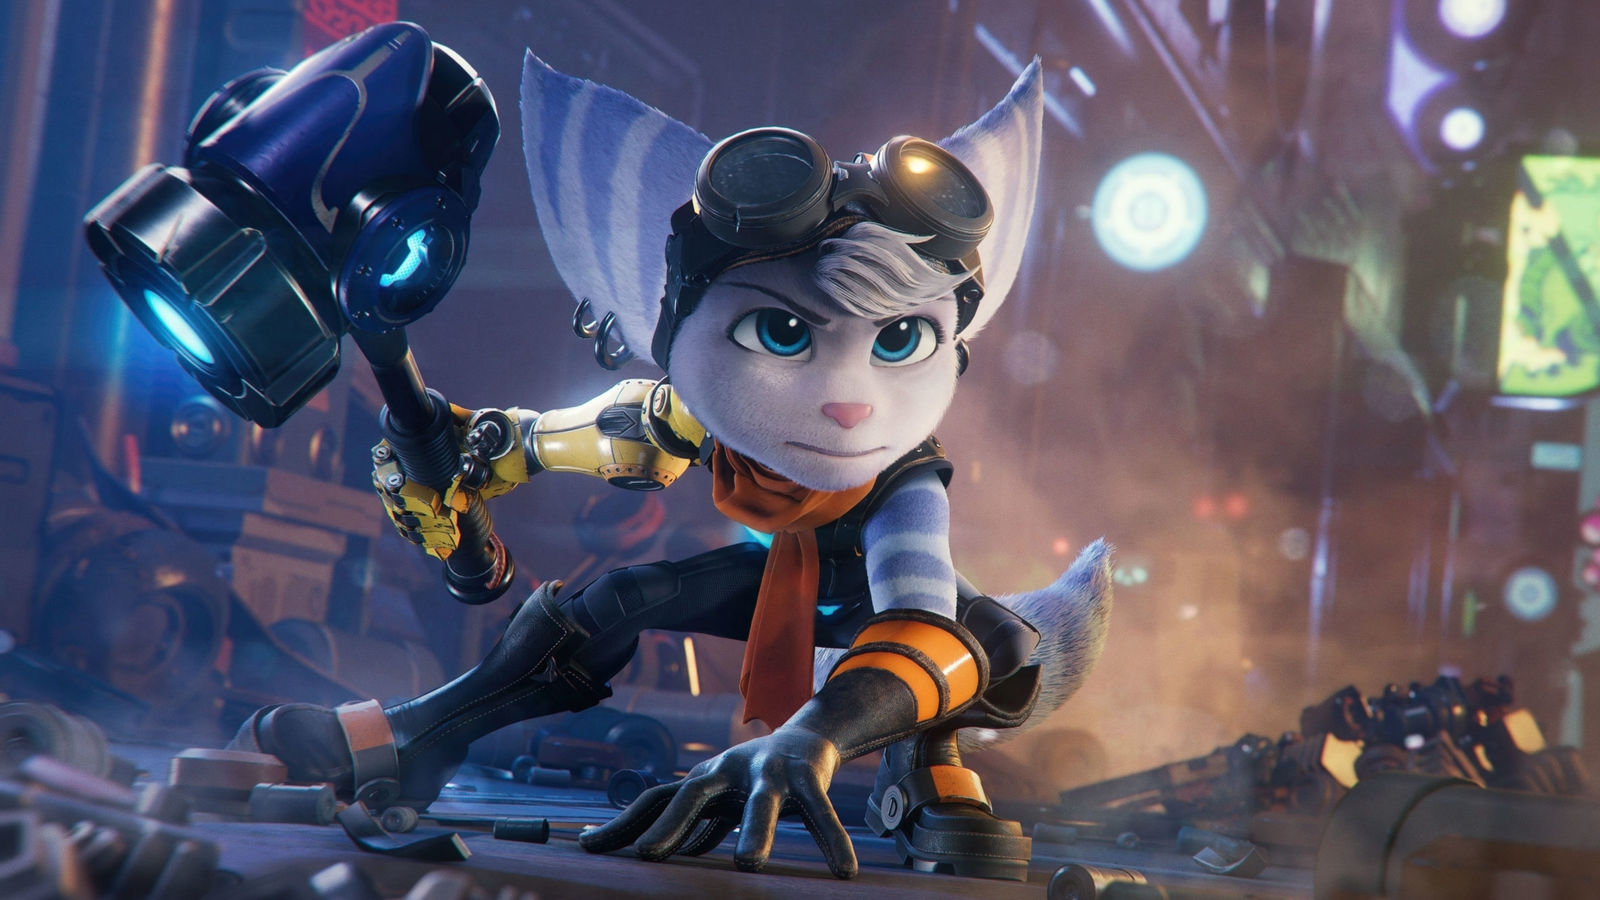 Ratchet & Clank: Rift Apart' reviews reveal 1 flaw in a near-perfect game